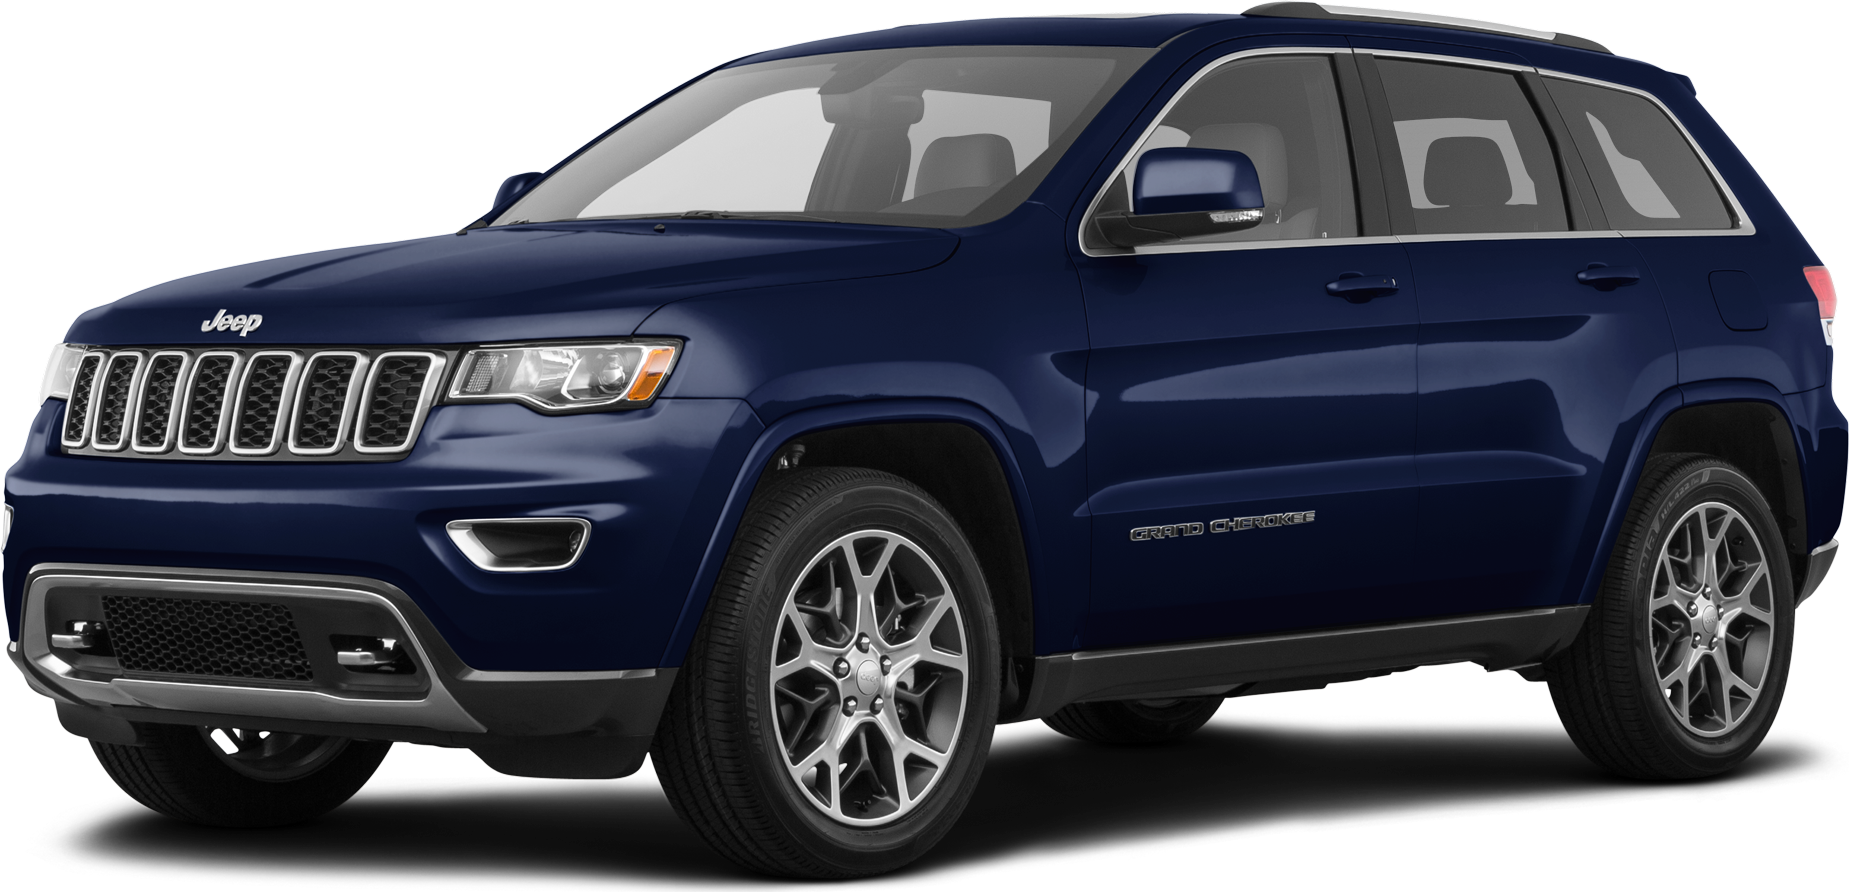 2018 Jeep Grand Cherokee Specs and Features | Kelley Blue Book